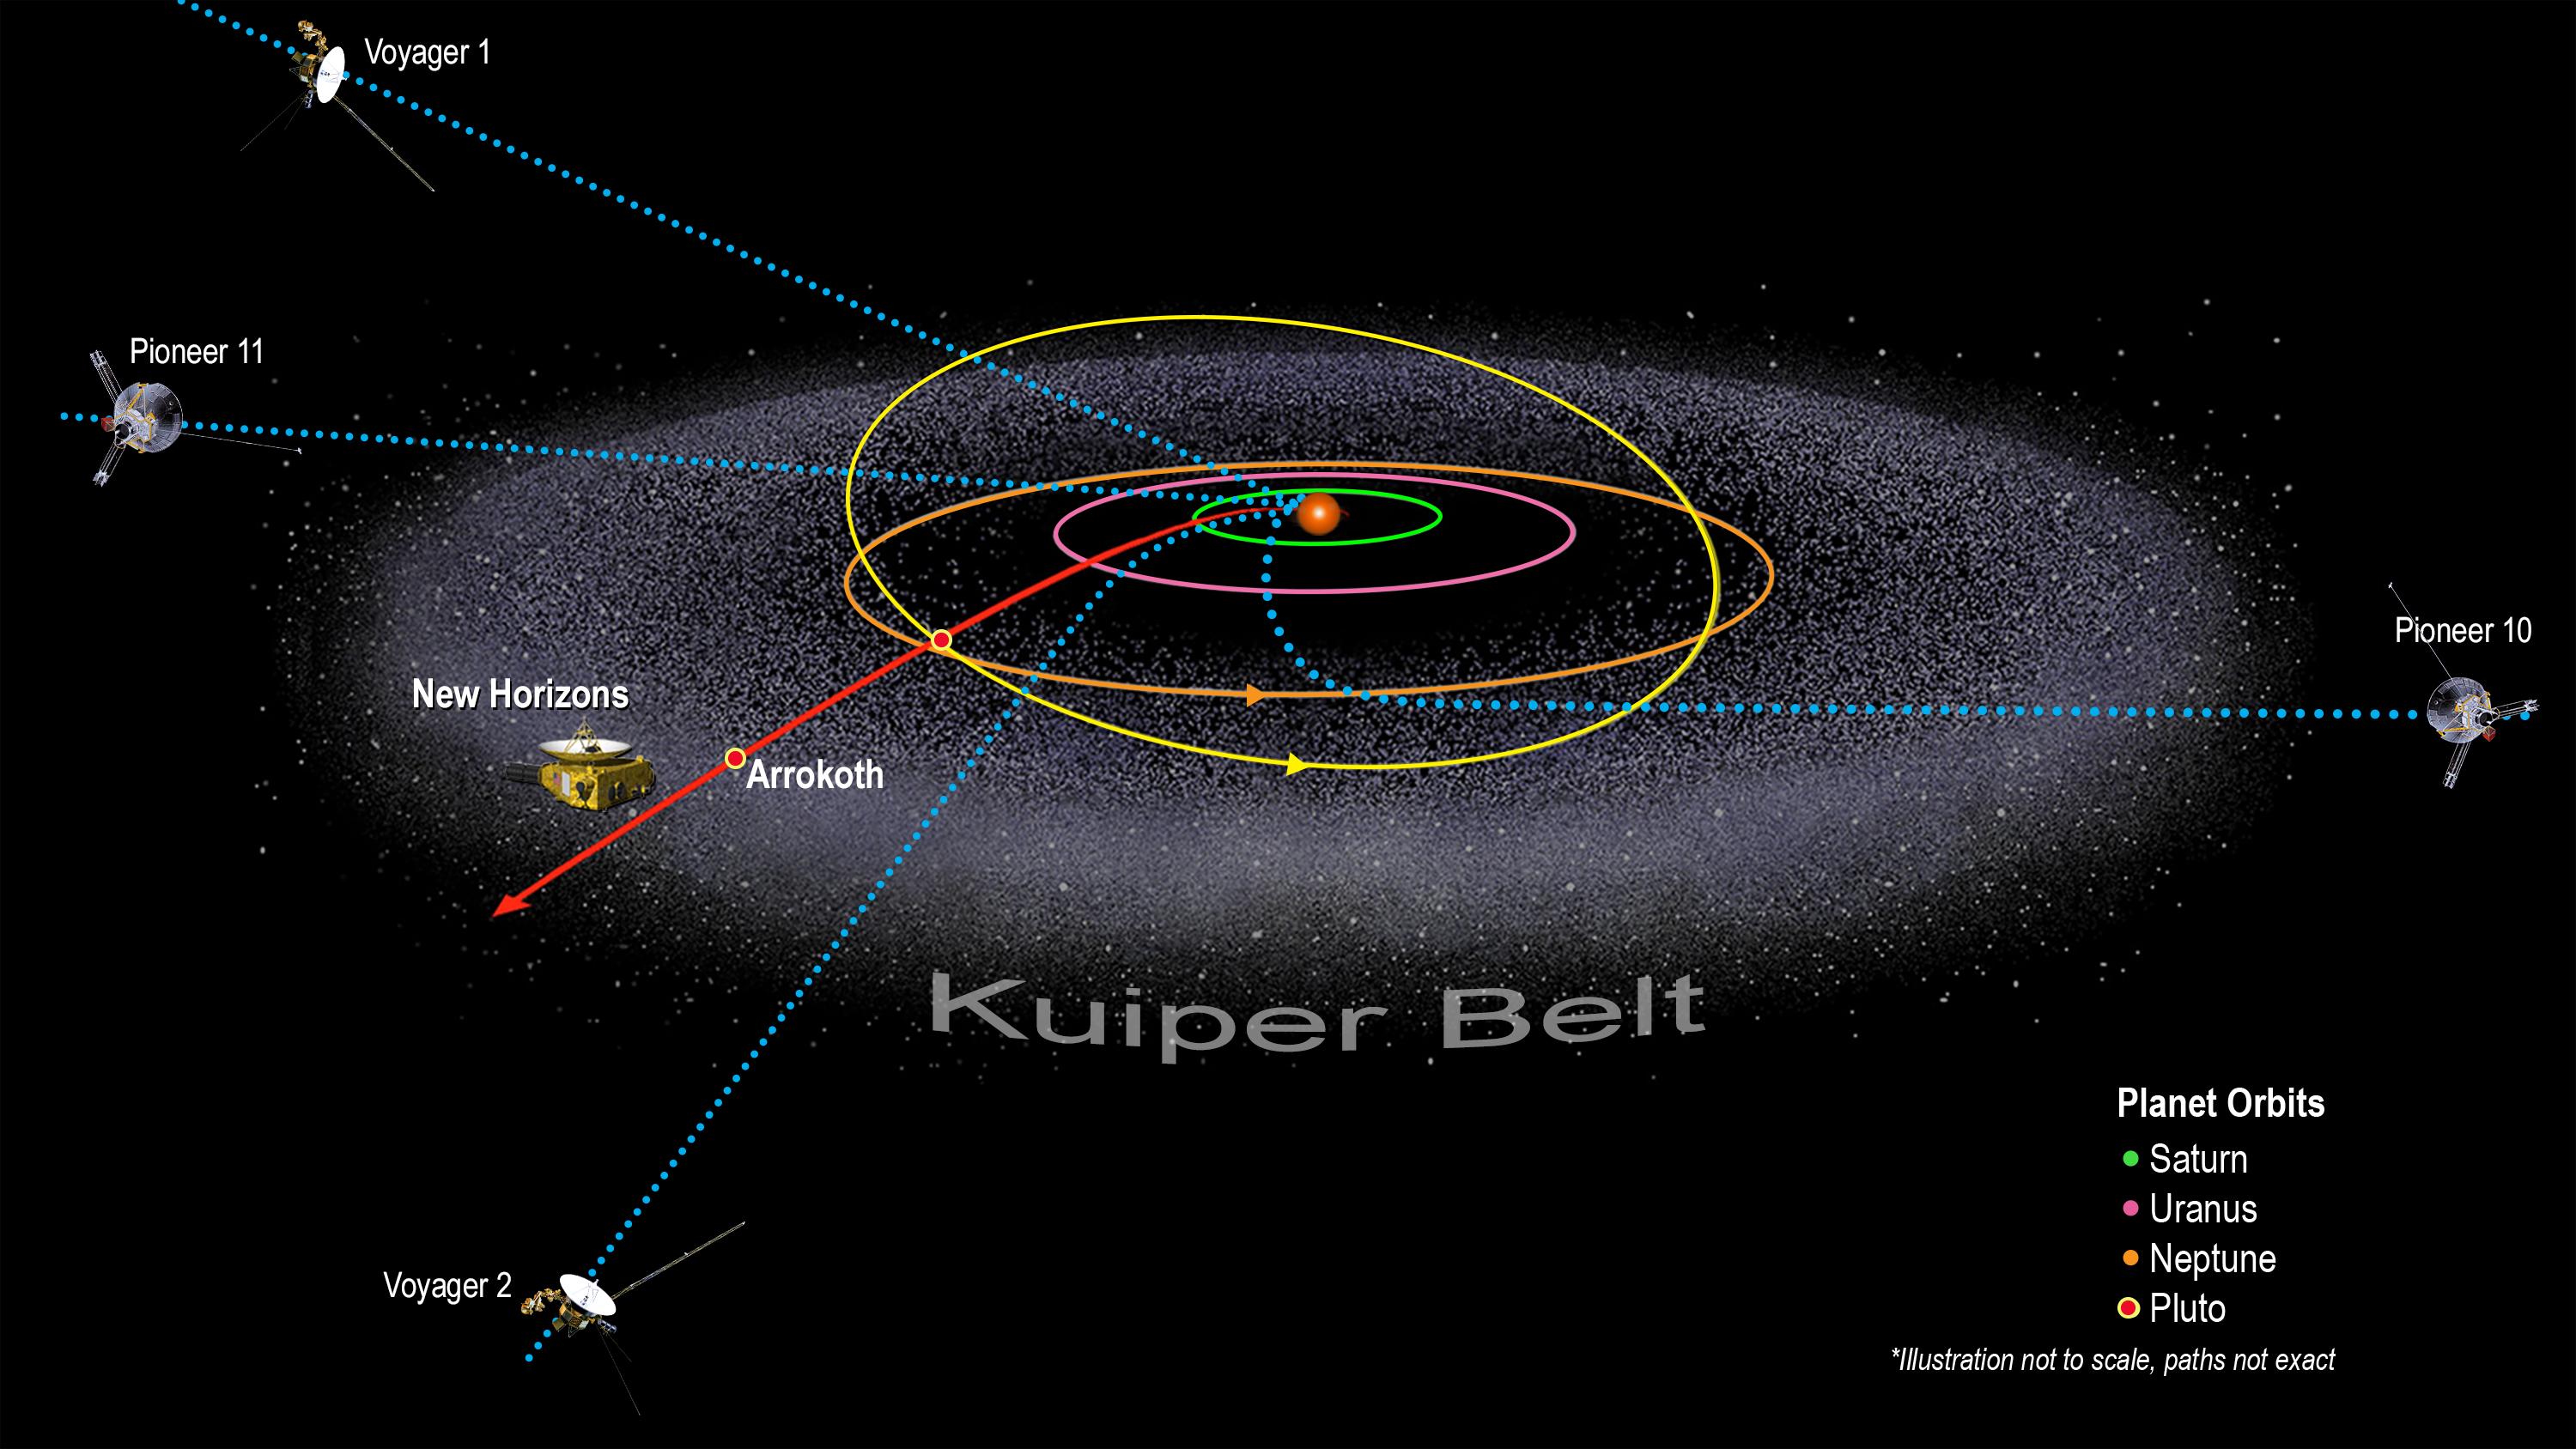 Illustration of the Kuiper Belt and the locations of five spacecraft, including New Horizons